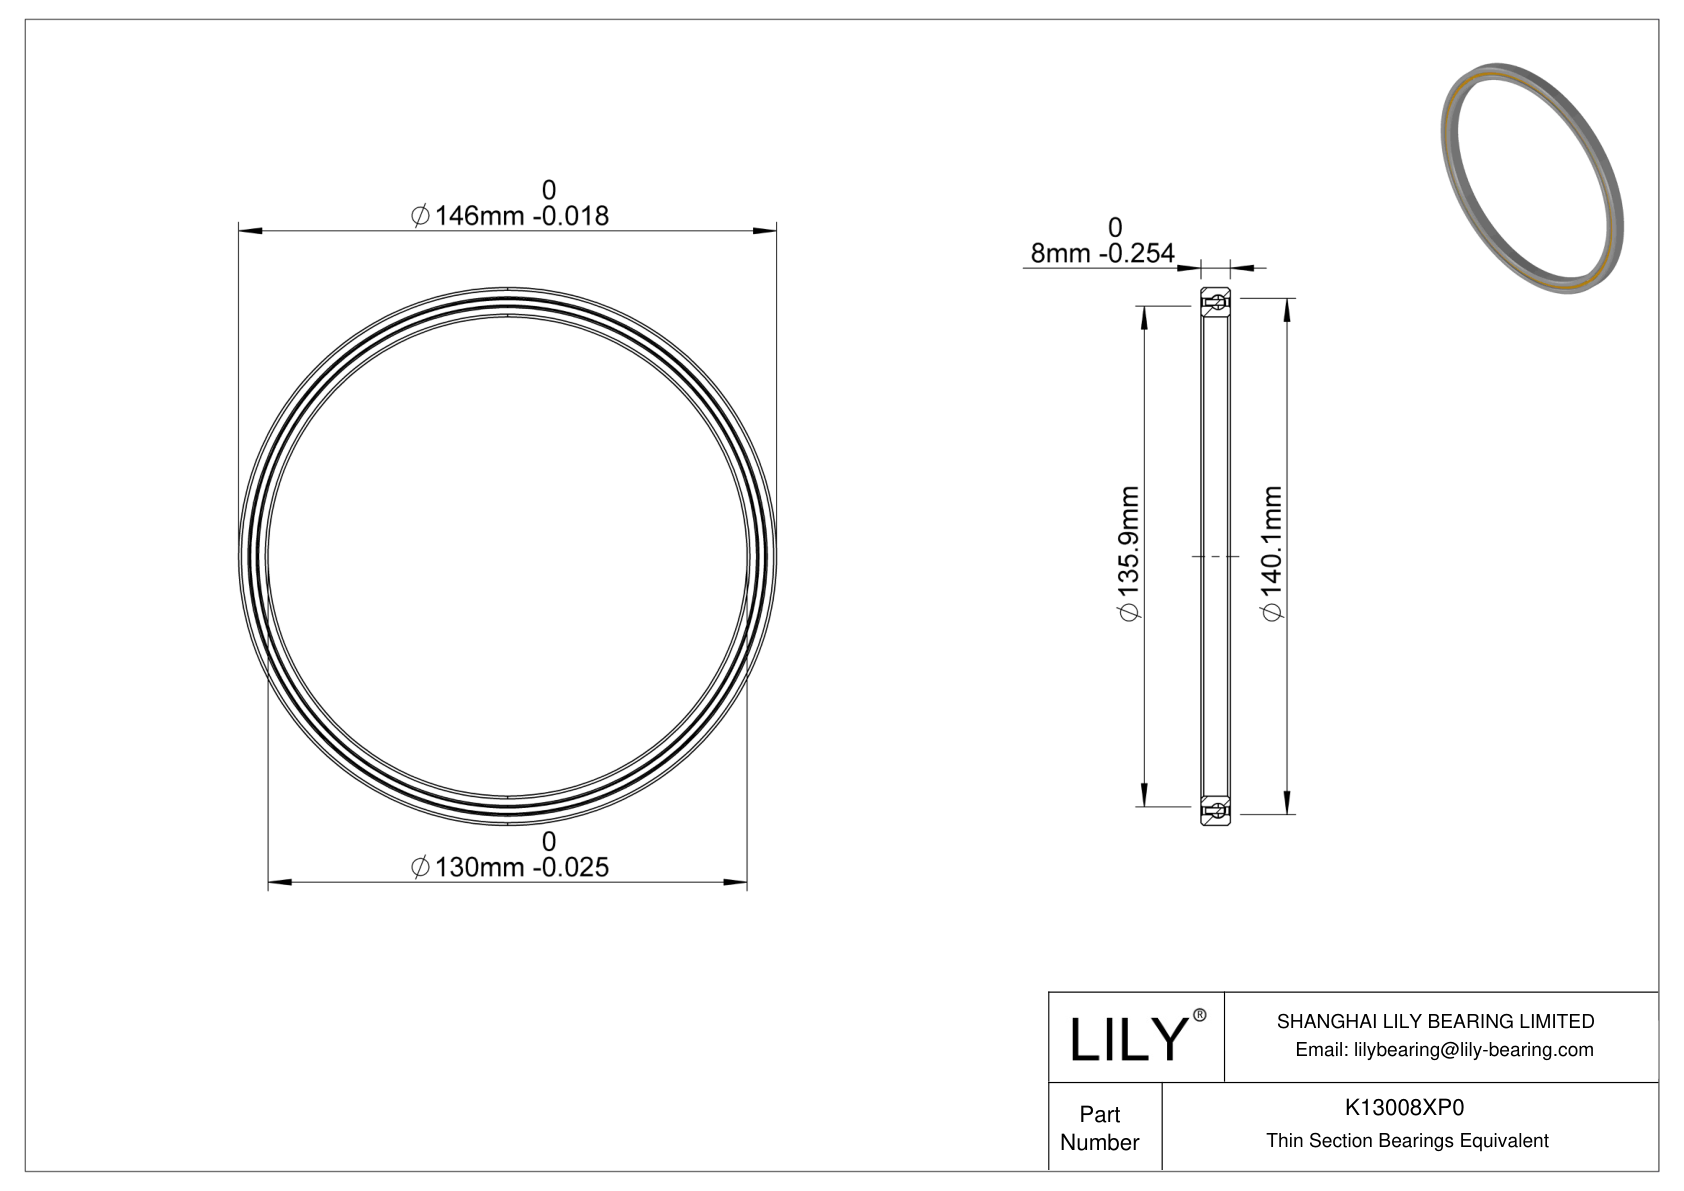 K13008XP0 Constant Section (CS) Bearings cad drawing